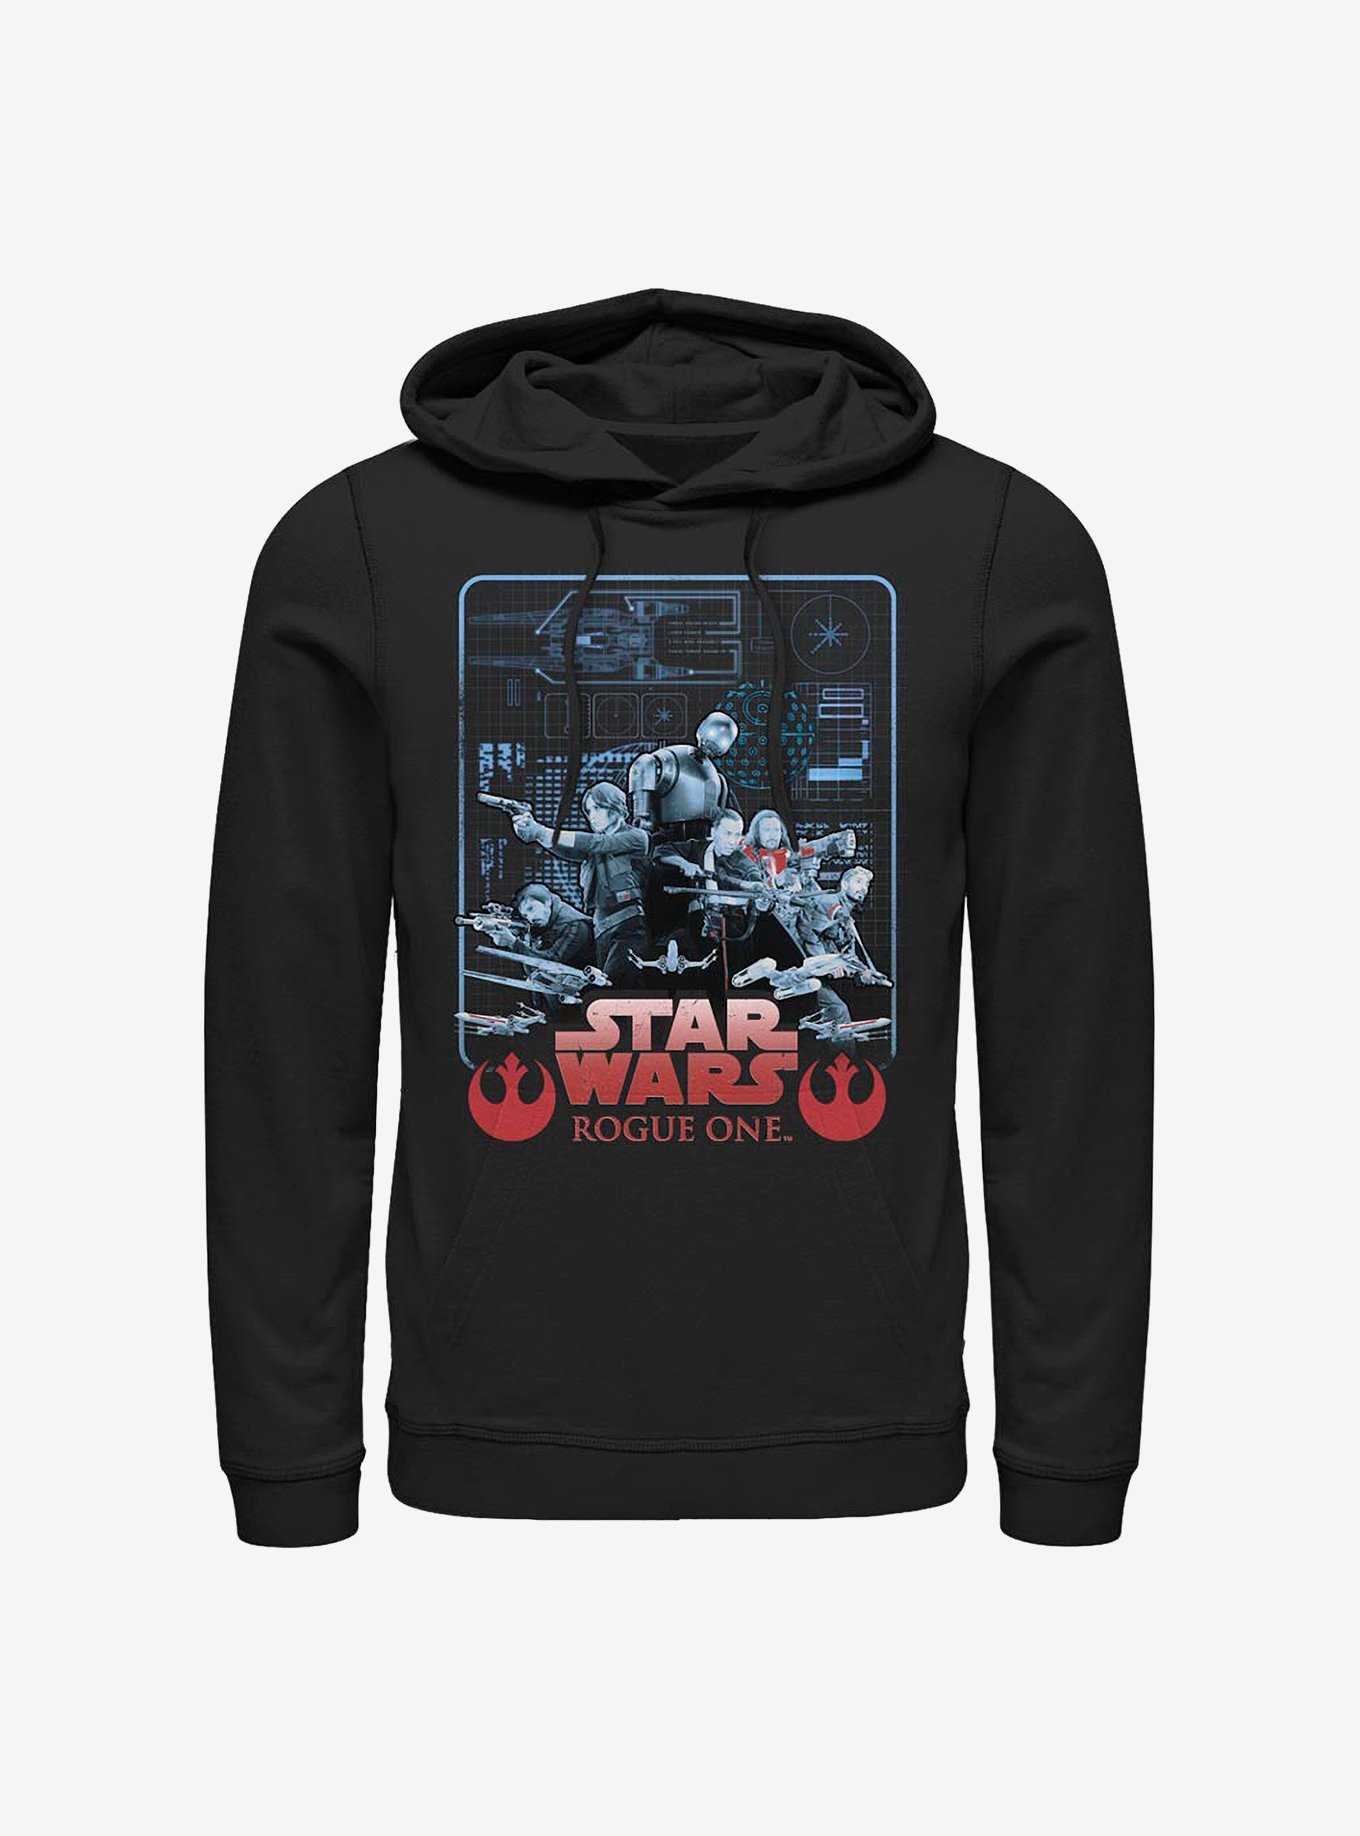 Star Wars Rogue One: A Star Wars Story Got Plans Hoodie, , hi-res